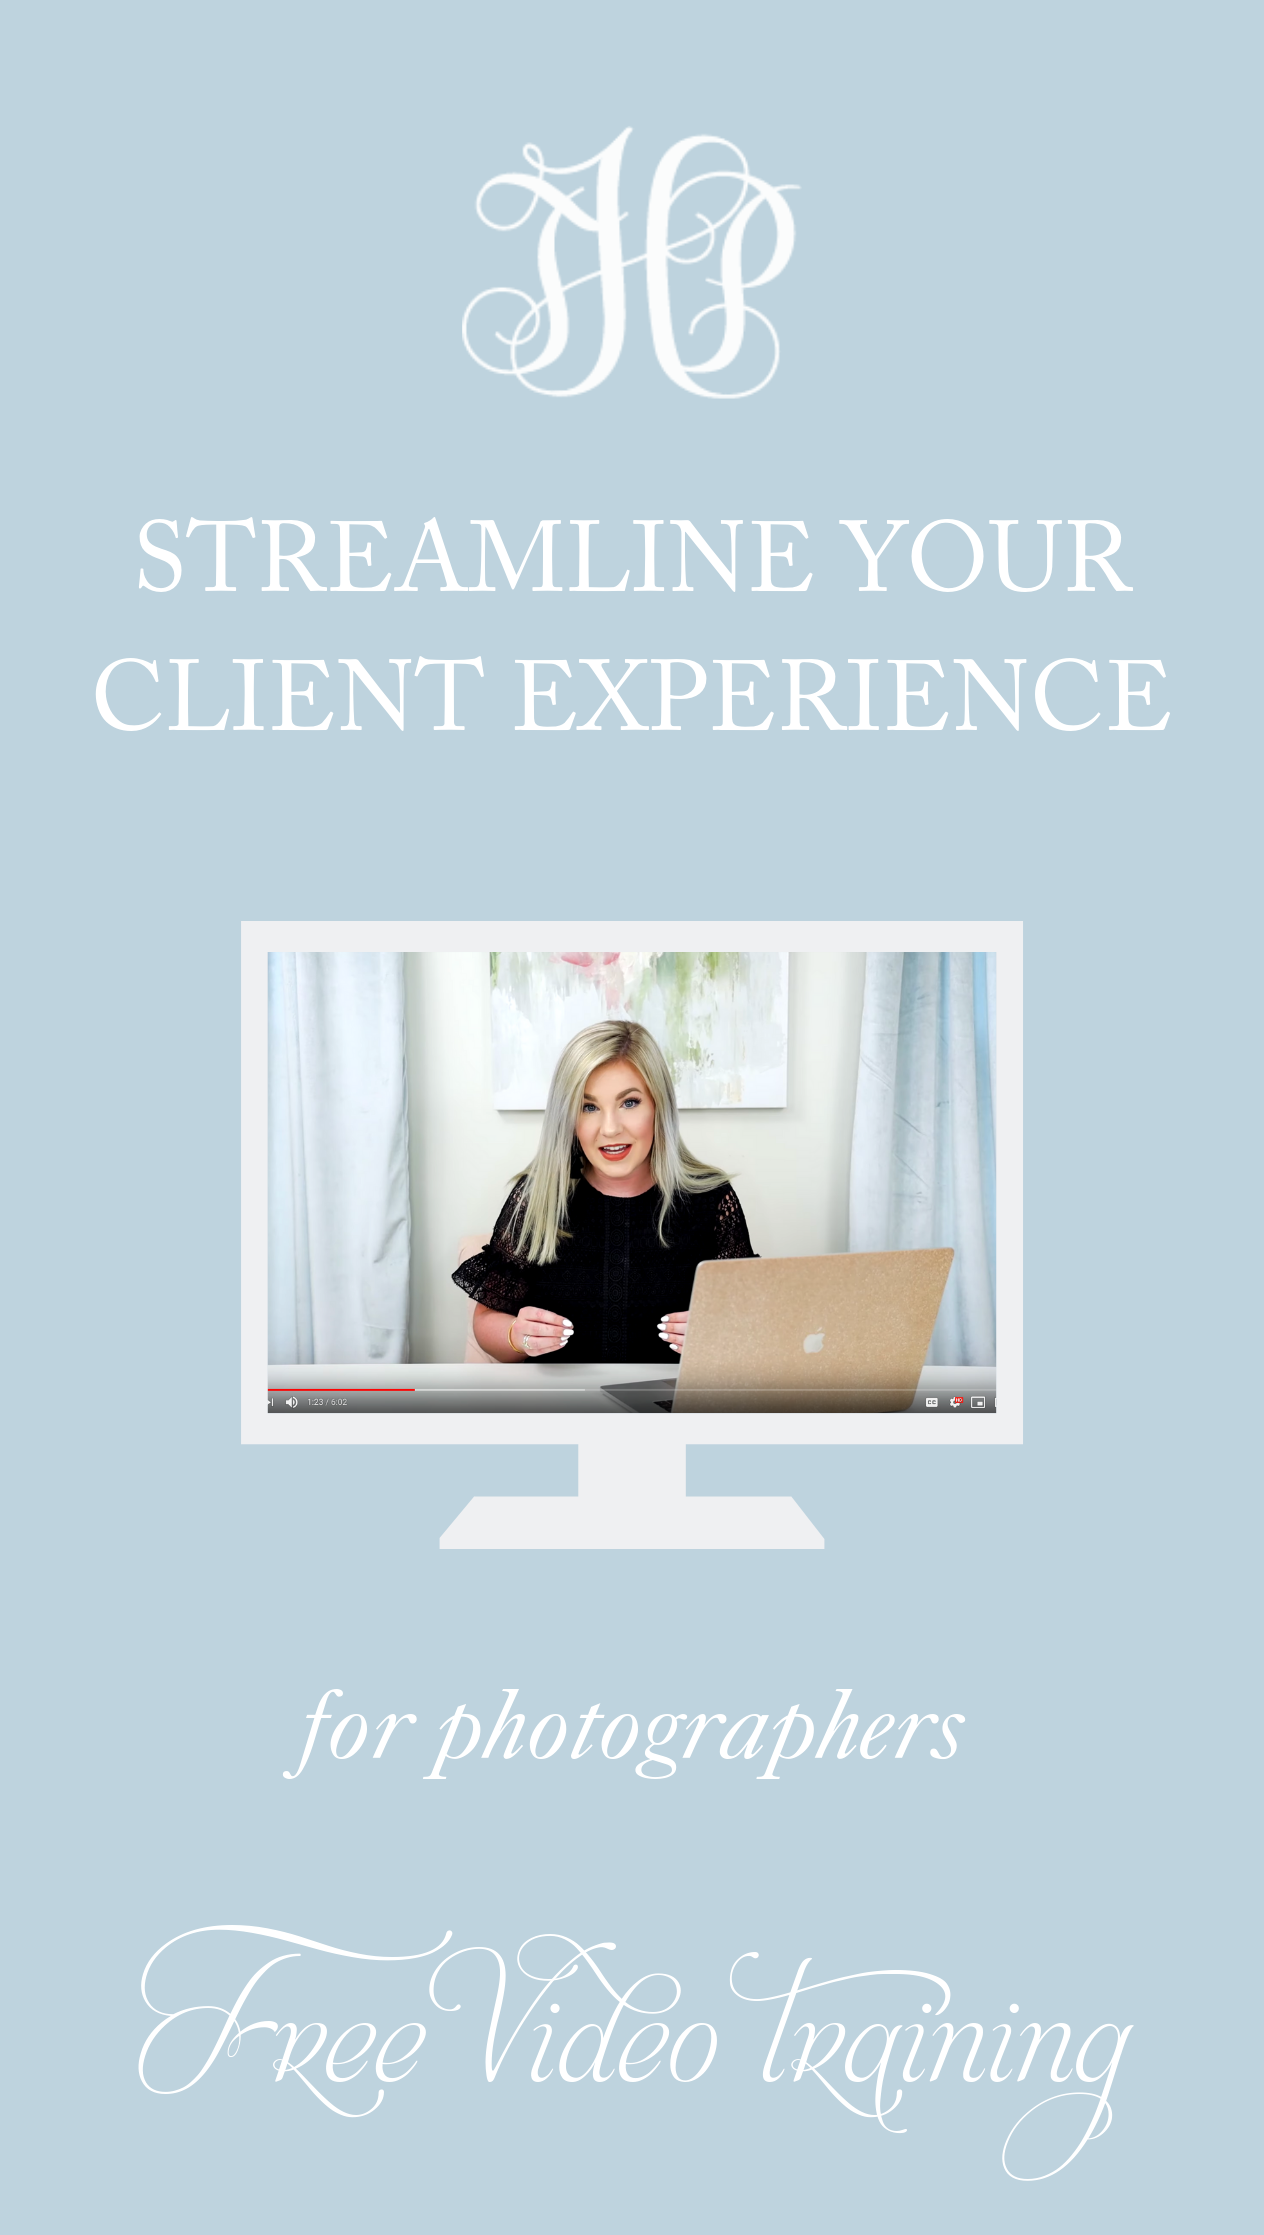 Streamline Your Client Experience for Photographers | Happy Hour with Hope Episode #8